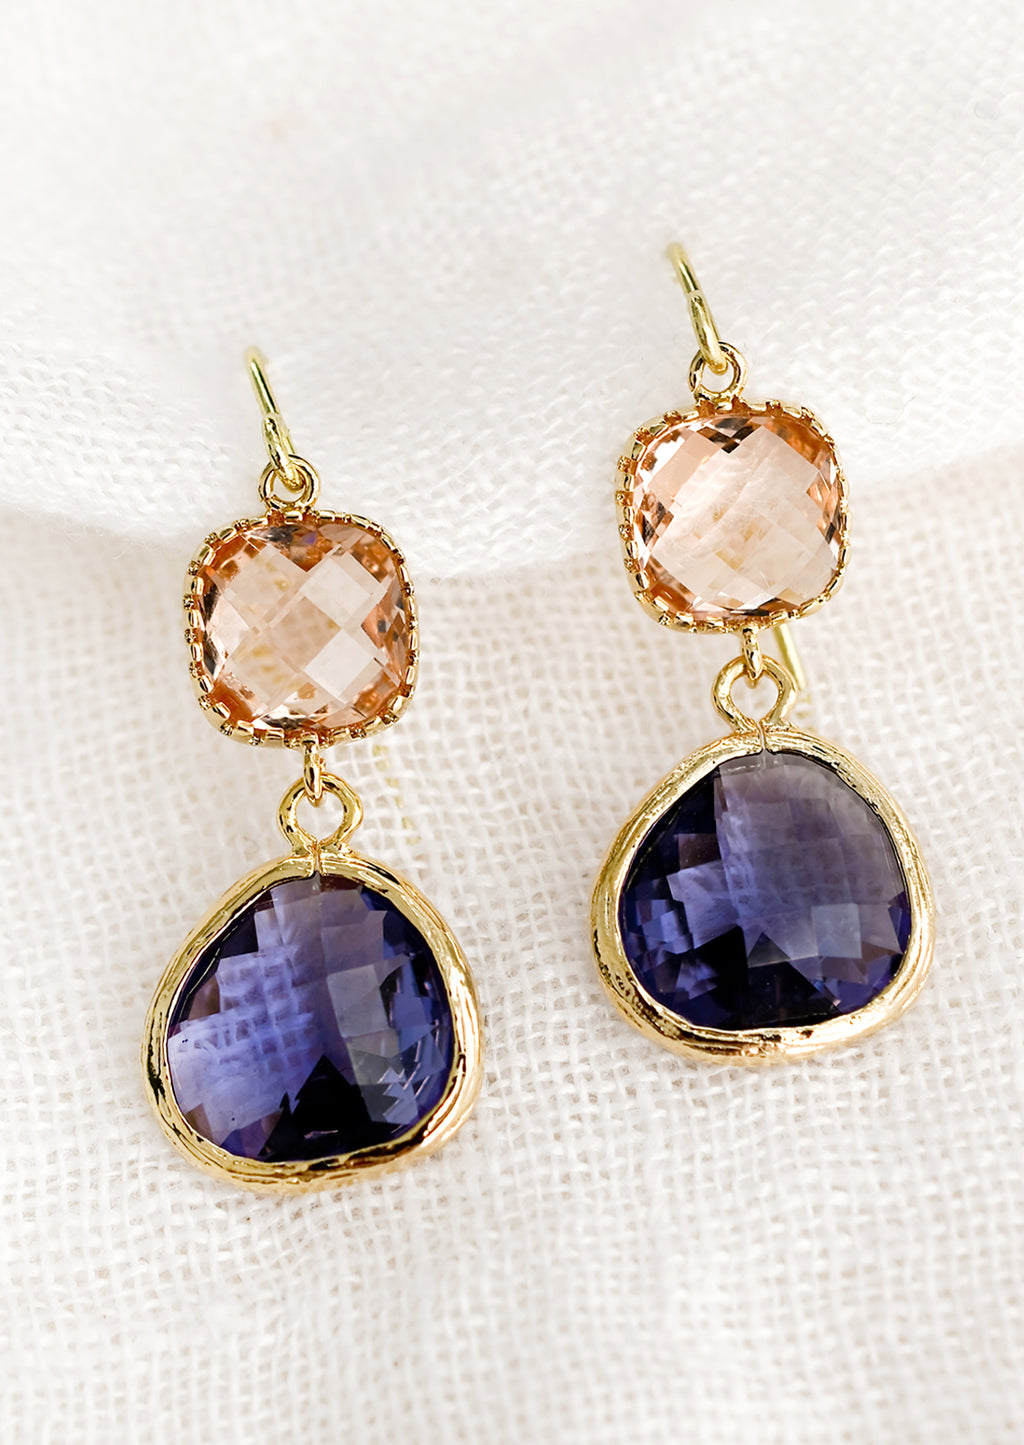 Peach / Tanzanite: A pair of two-stone bezeled gem earrings in peach and tanzanite.